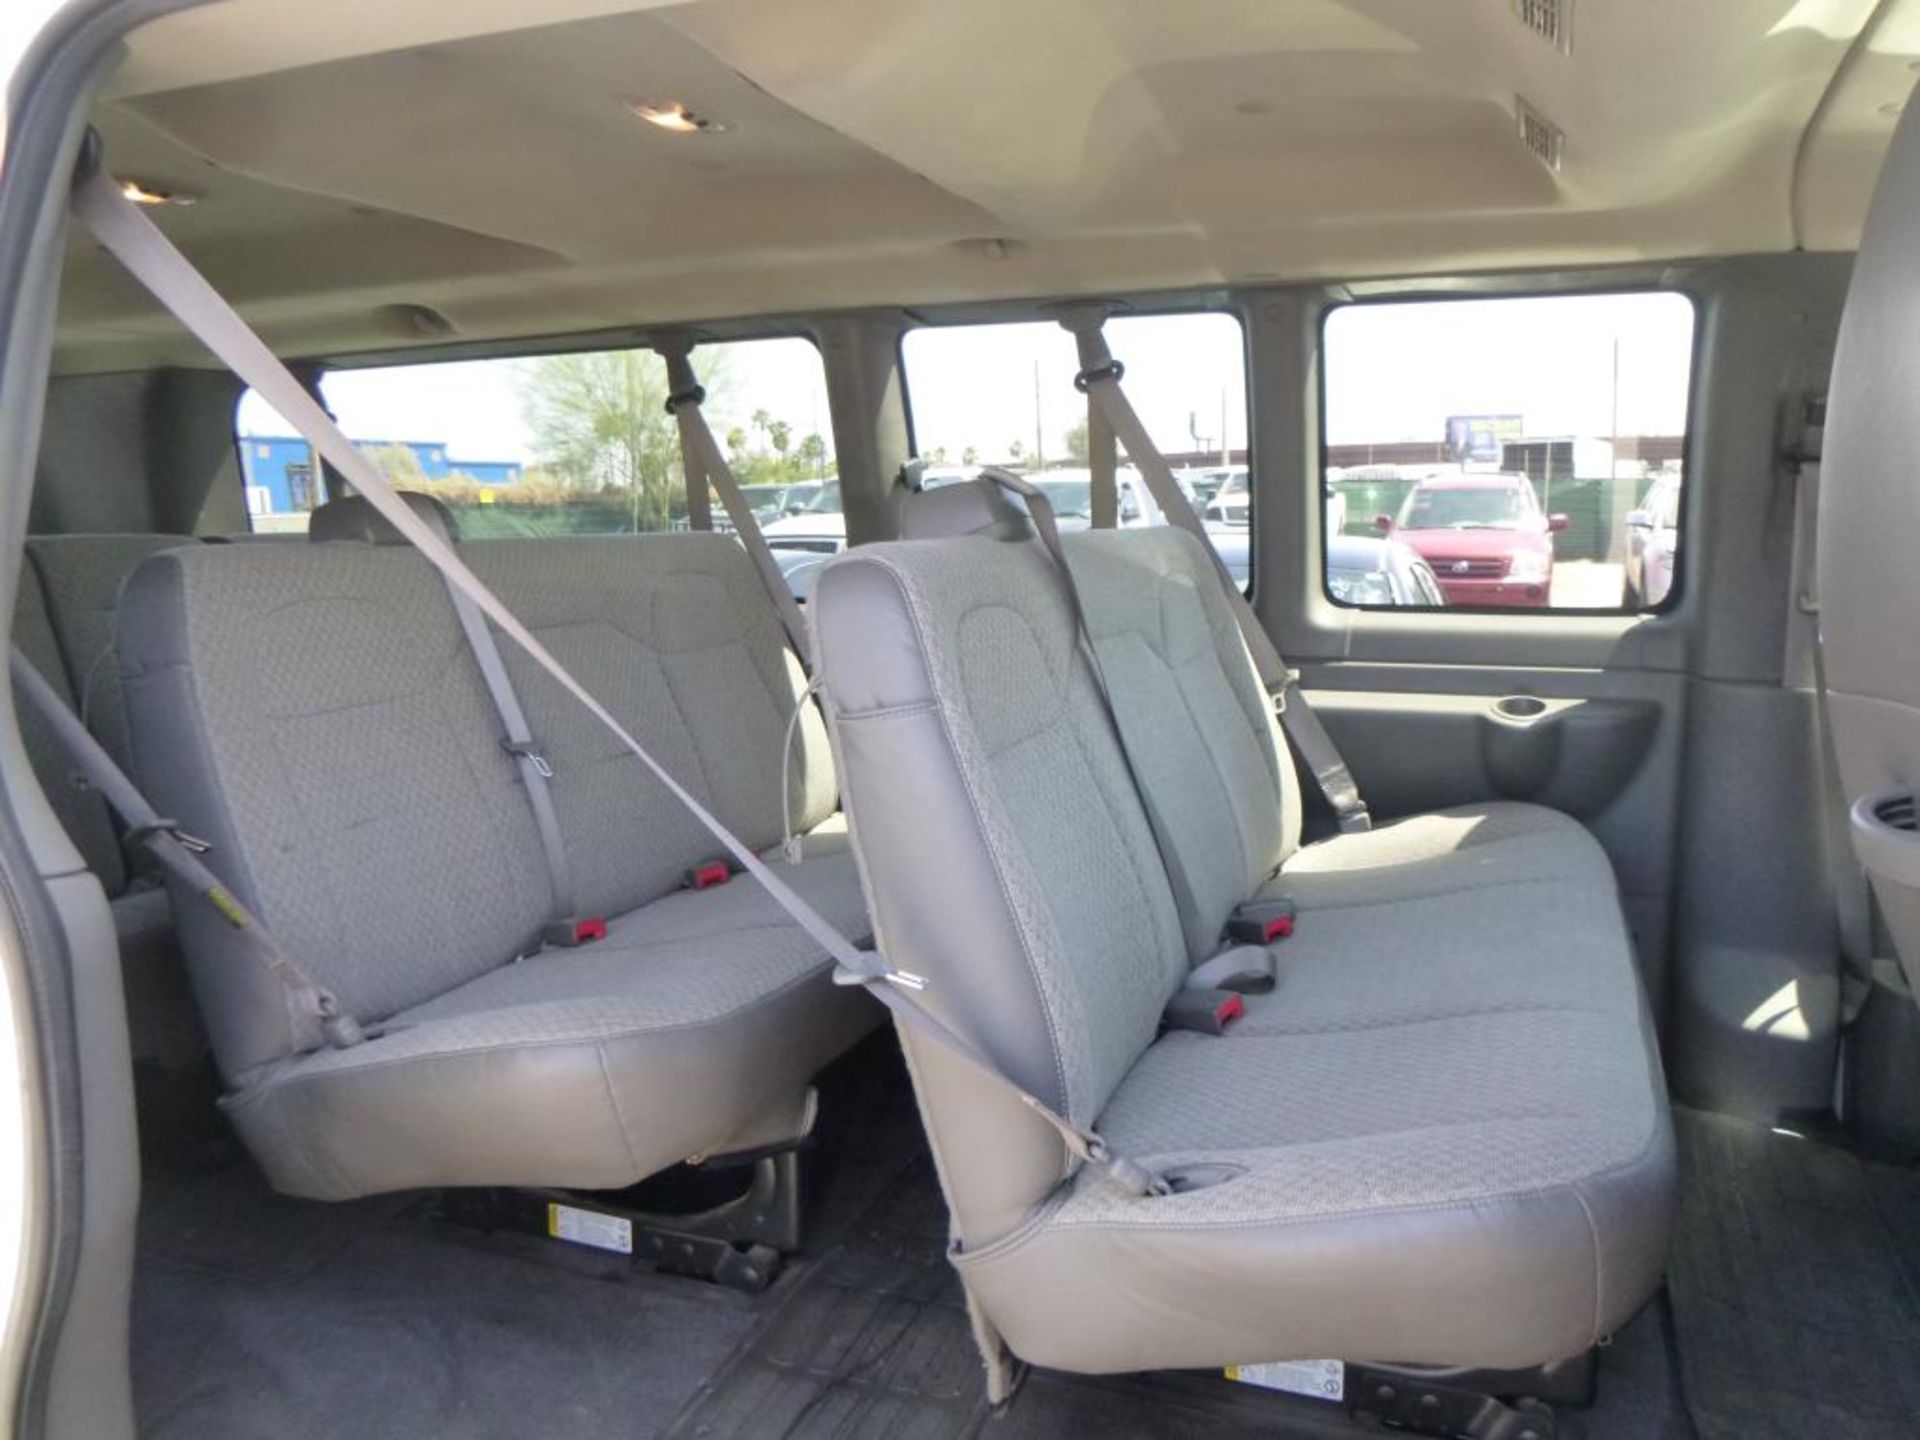 (Lot # 3901) - 2012 Chevrolet Express G1500 - Image 8 of 13